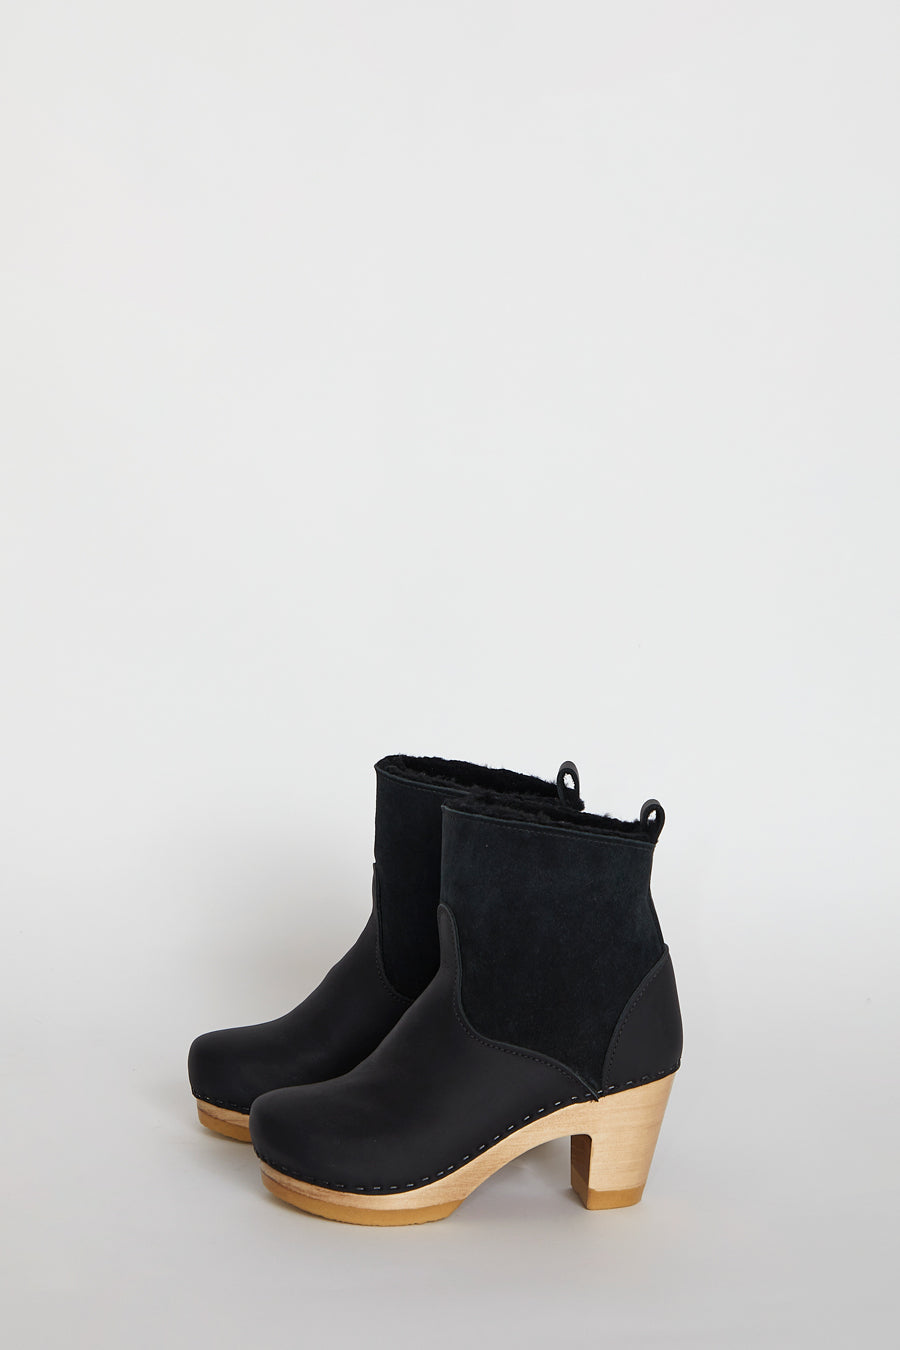 No.6 5" Pull On Shearling Clog Boot on High Heel in Black Suede